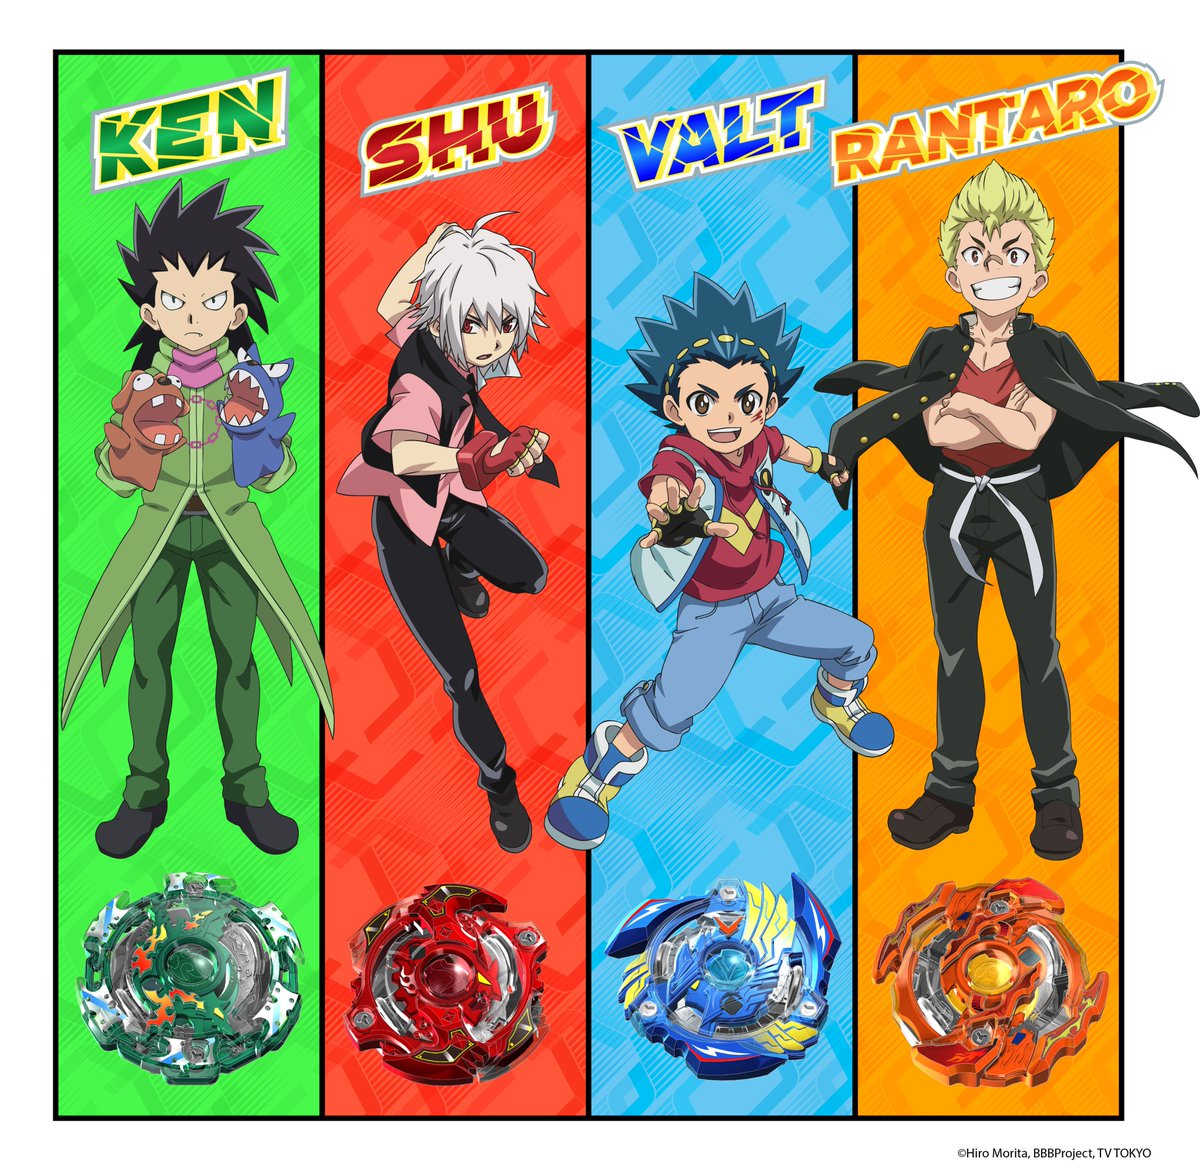 Beyblade Official on Twitter: "All of these Bladers are but which is your favorite? Cast your votes Bladers! #beybladeburst / Twitter